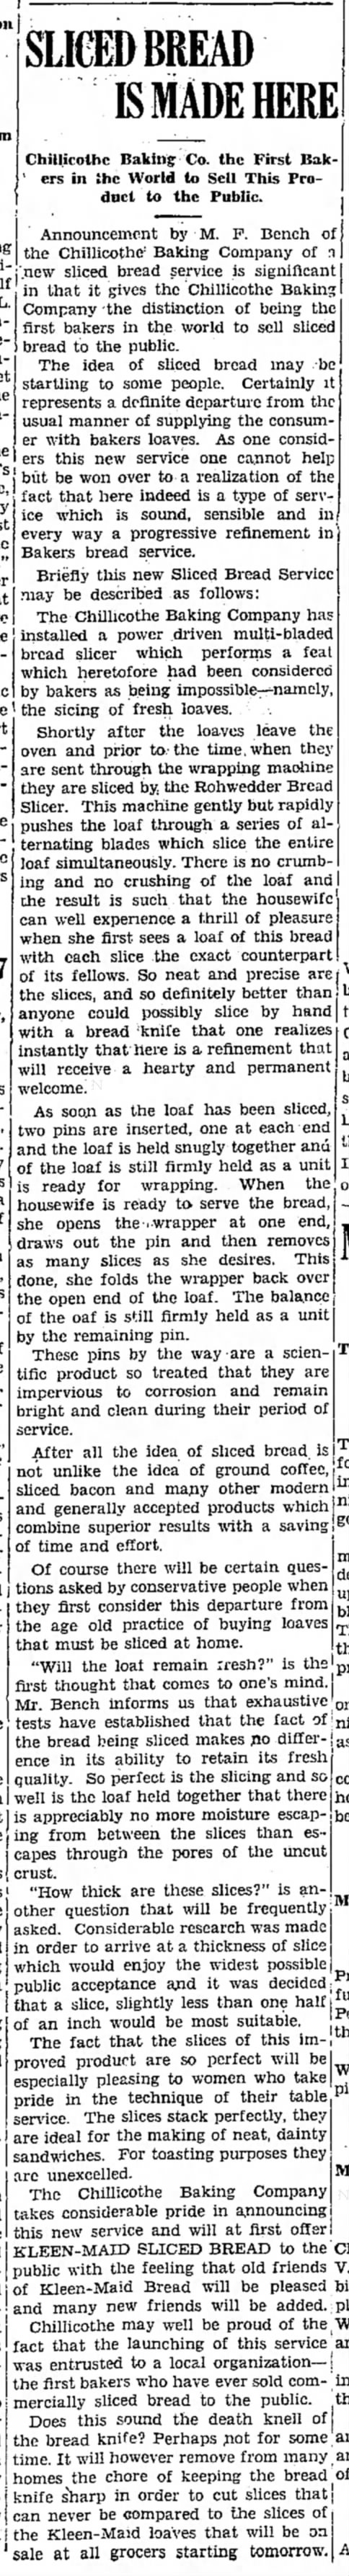 Sliced bread is sold for the first time, 1928